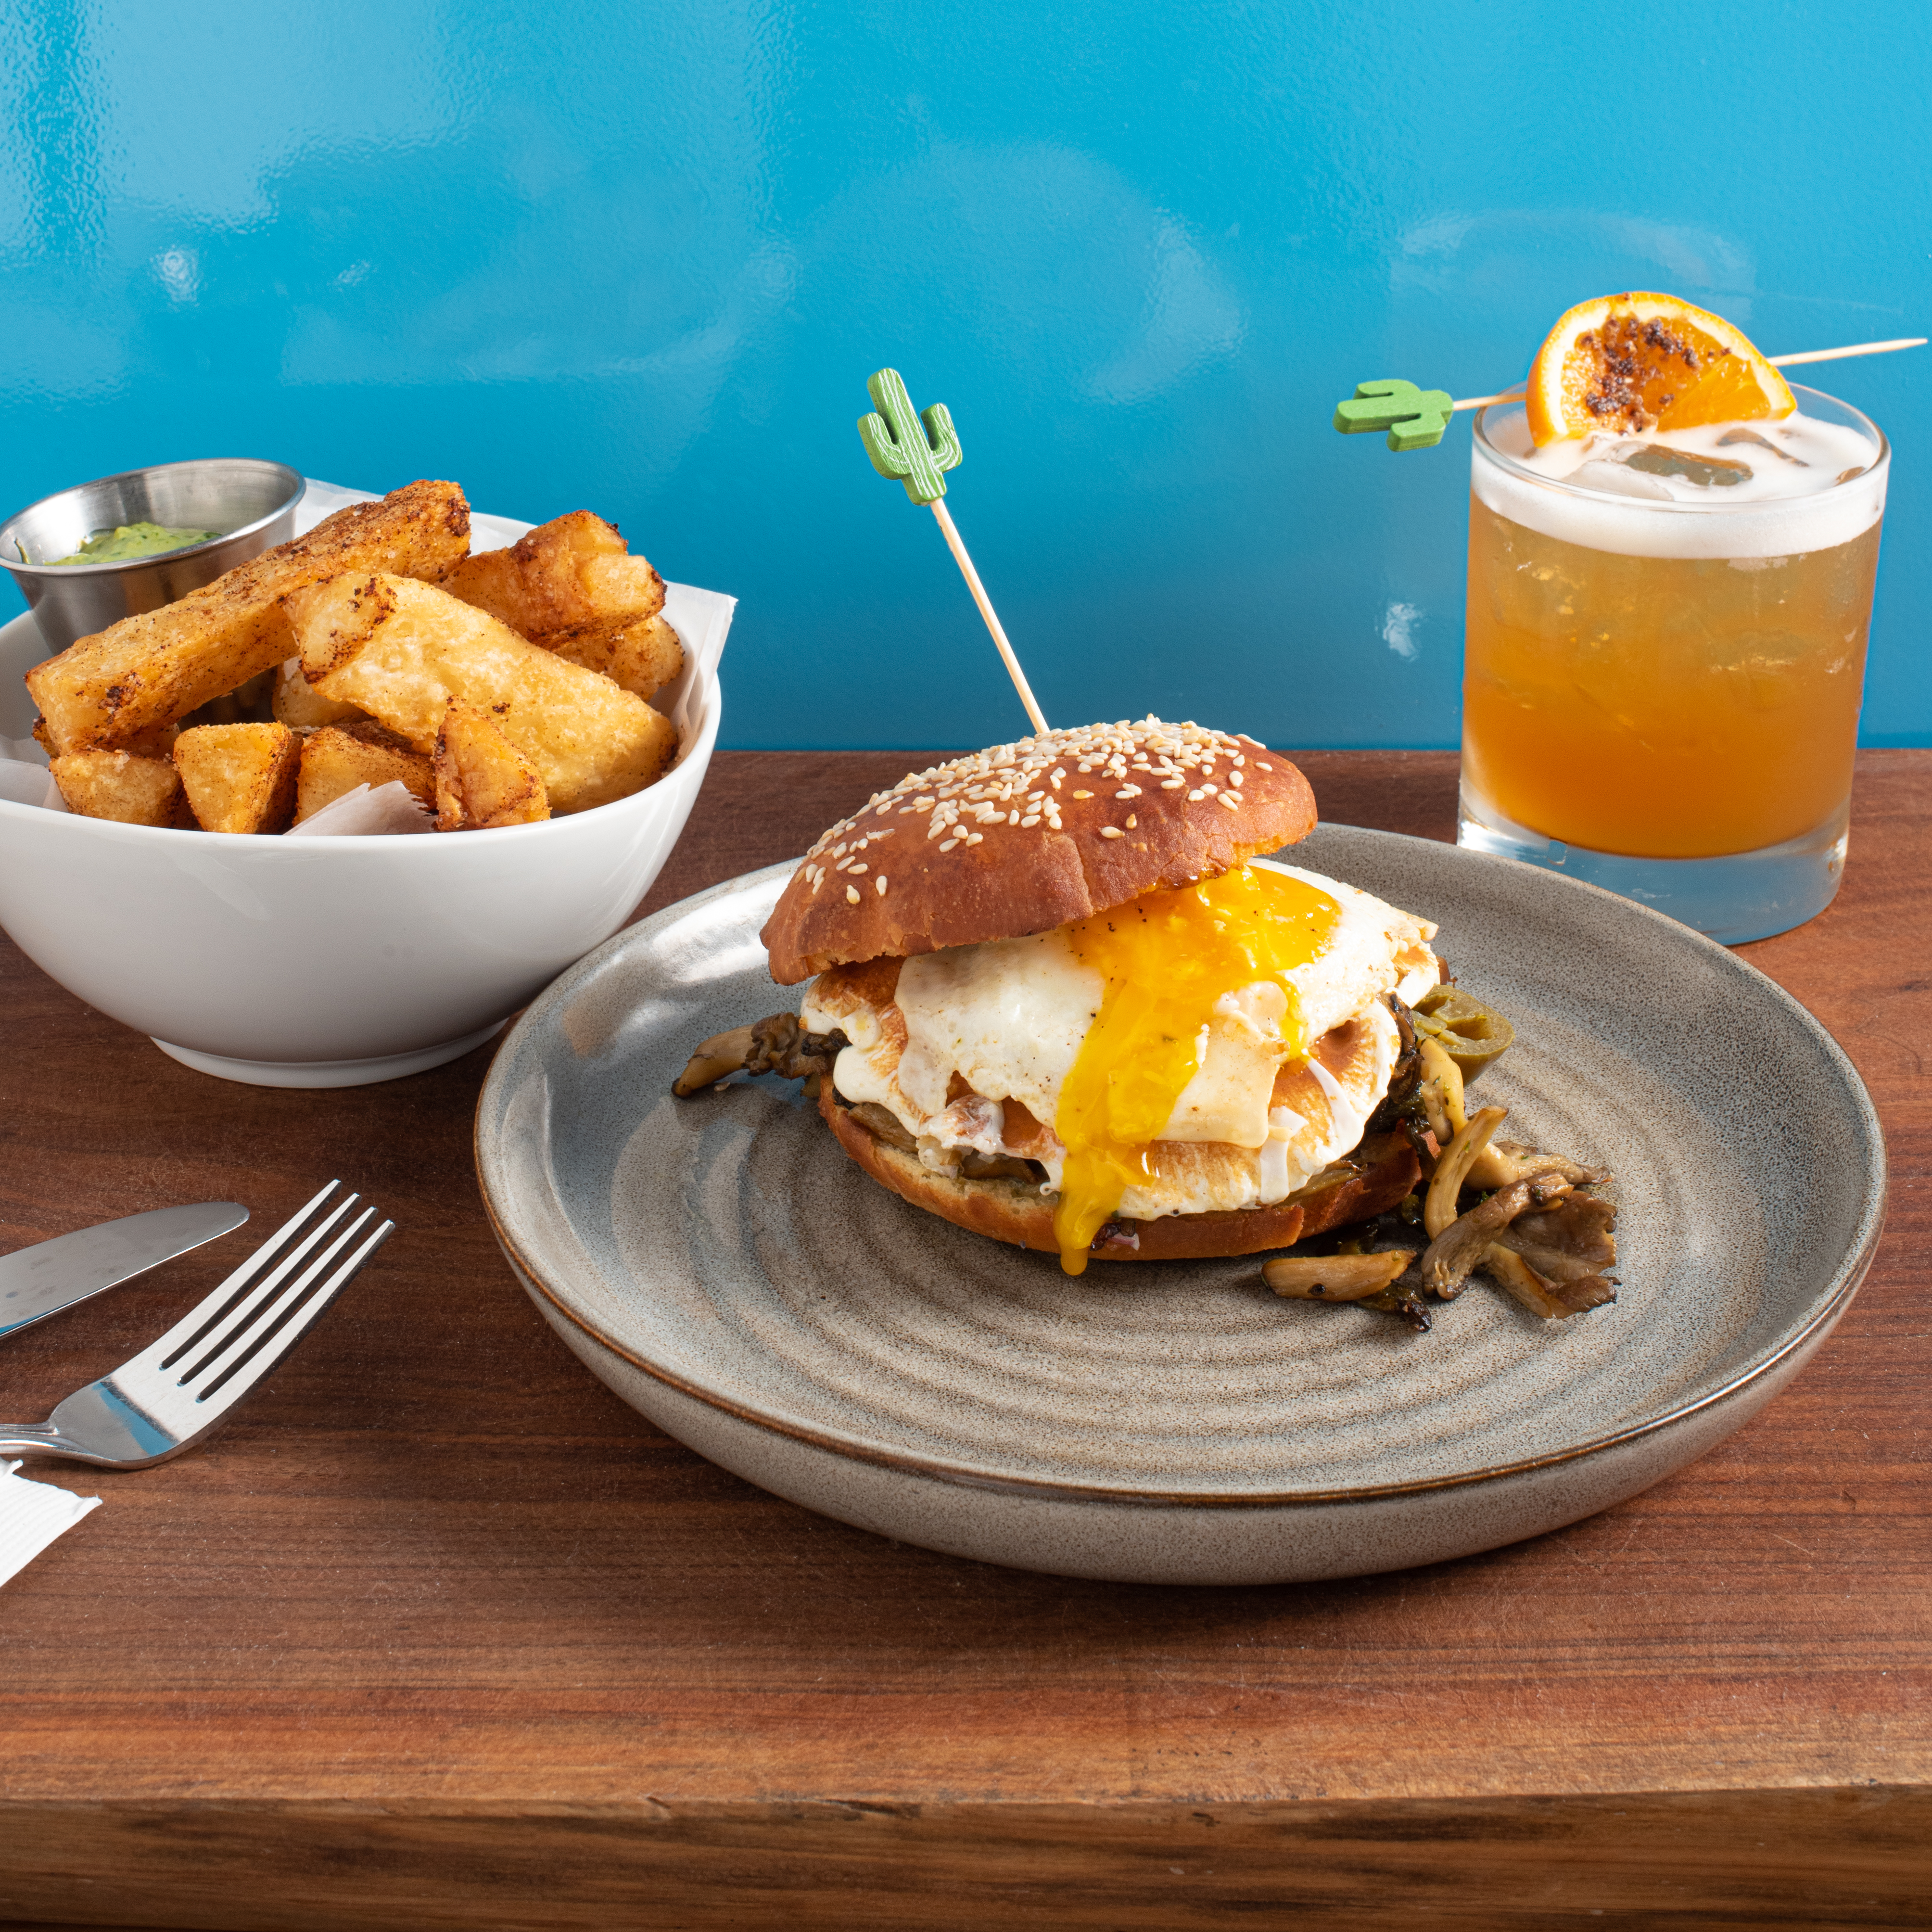 A breakfast sandwich with a gooey egg yolk on a bun is front and center, with an orange cocktail with a frothy top, and a white bowl of crispy potatoes in the background.